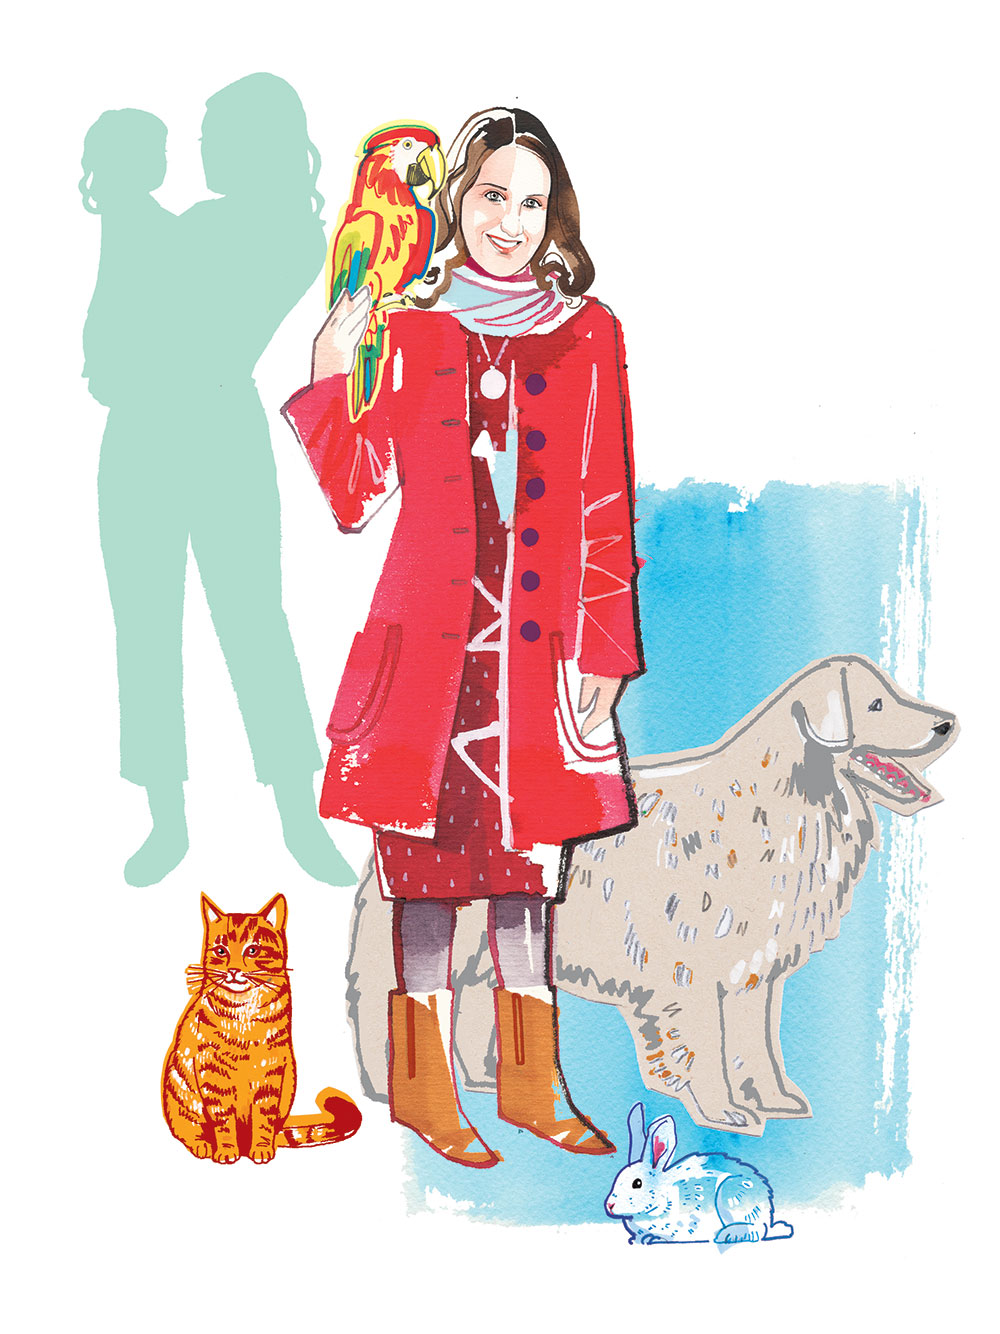 Illustrated Portrait of the Previous and Current Job of Tanja - ex Nursery Teacher now Animals Keeper - Coop - Cooperazione, 2022